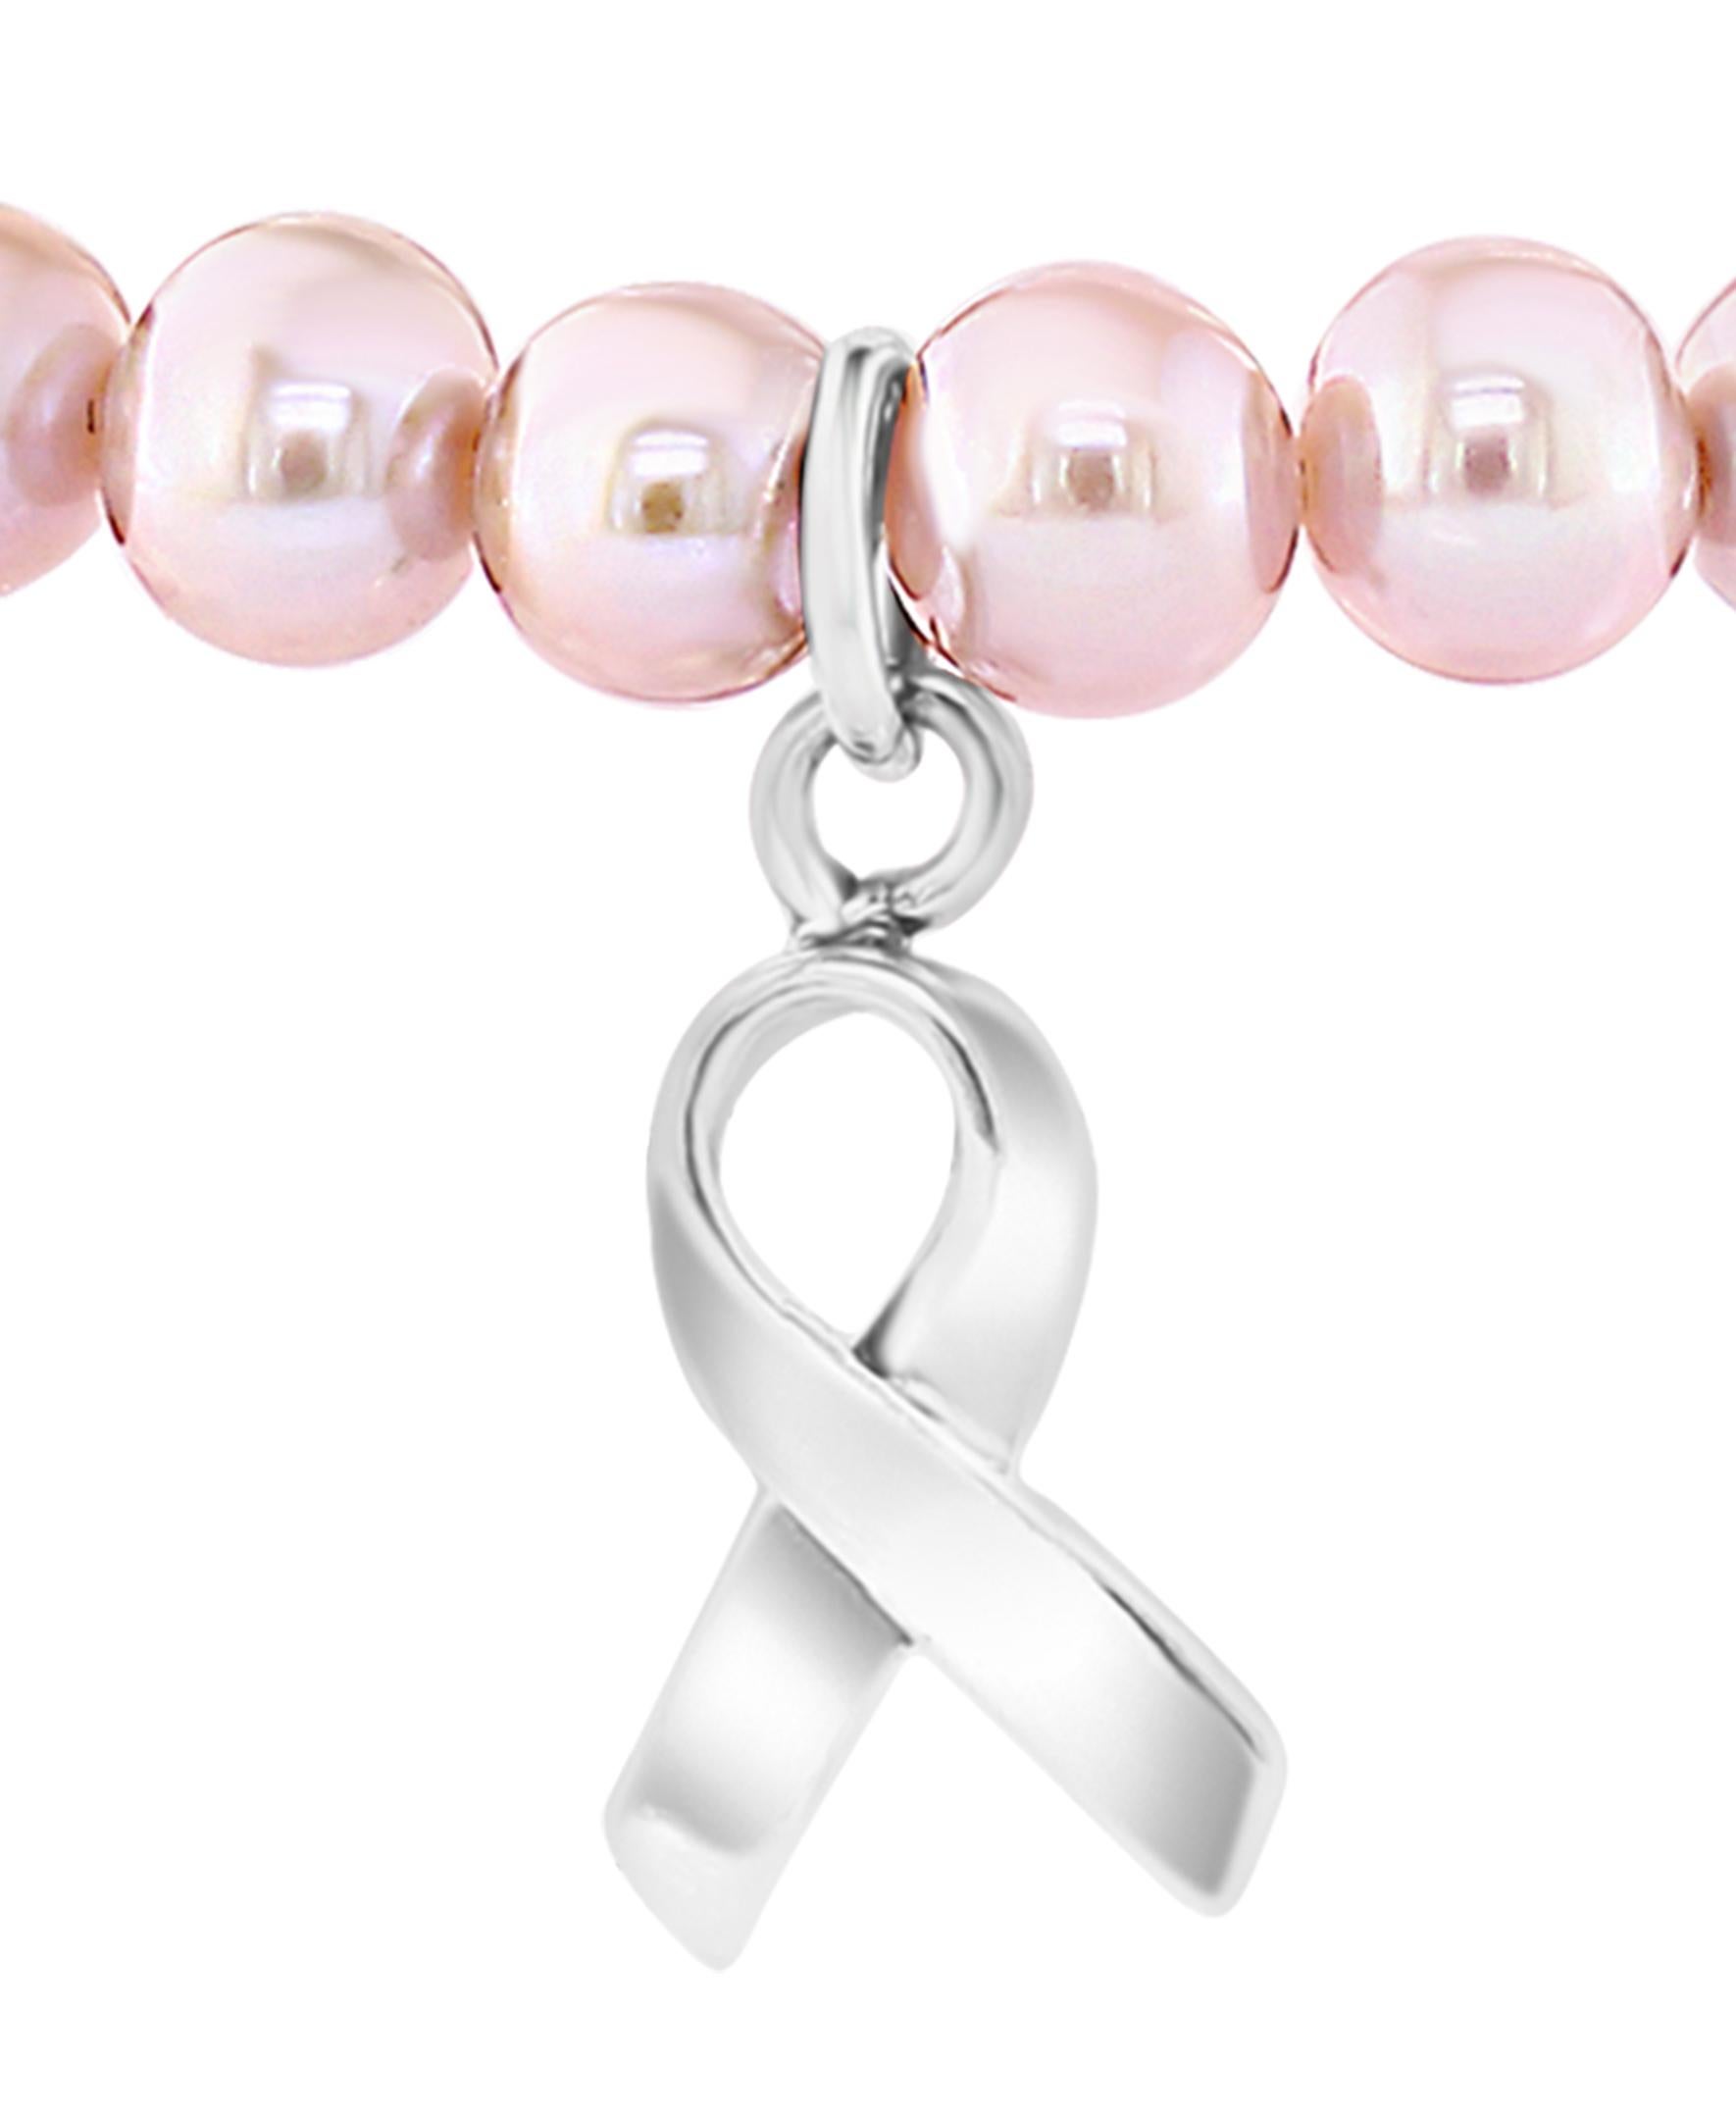 This stretch bracelet features Chinese Freshwater cultured natural-pink colored round 6-6.5mm pearls. The bracelet is accented with a sterling silver ribbon charm and is finished to 7 inches in length.
This gorgeous cultured freshwater pearl jewelry